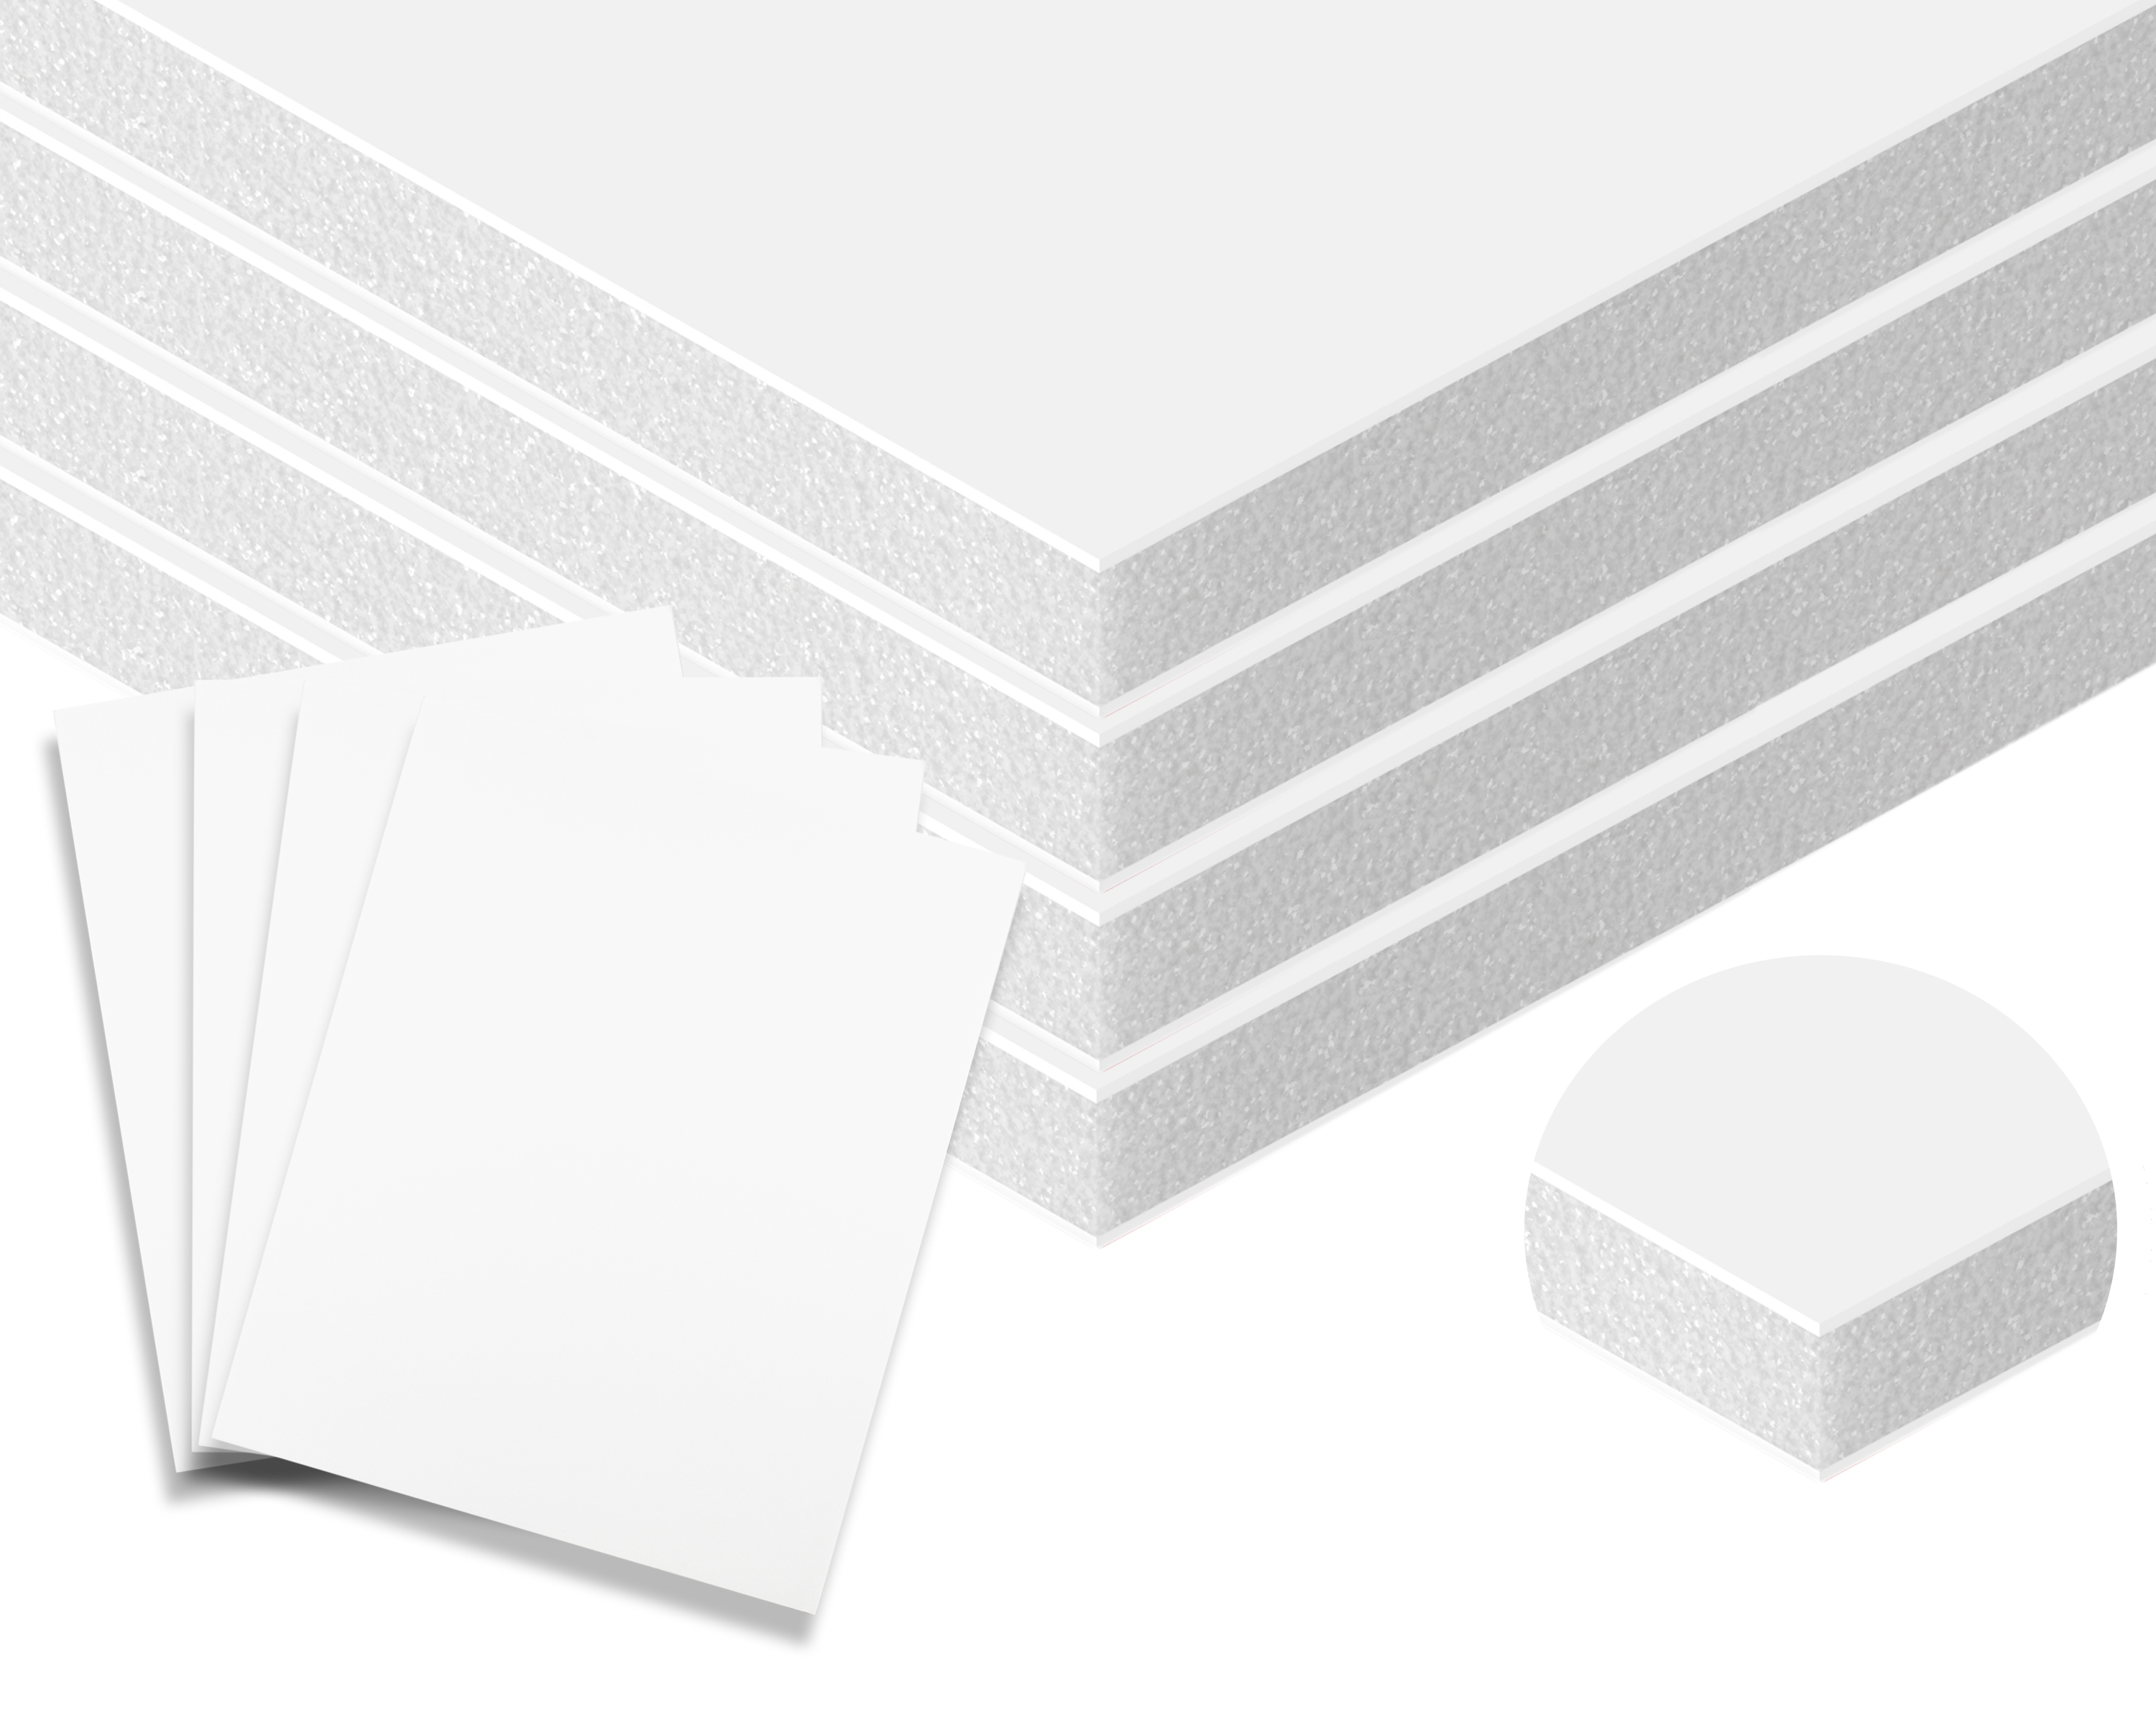 Foam Core Backing Board 3/16 White 24x48- 5 Pack. Many Sizes Available.  Acid Free Buffered Craft Poster Board for Signs, Presentations, School,  Office and Art Projects 